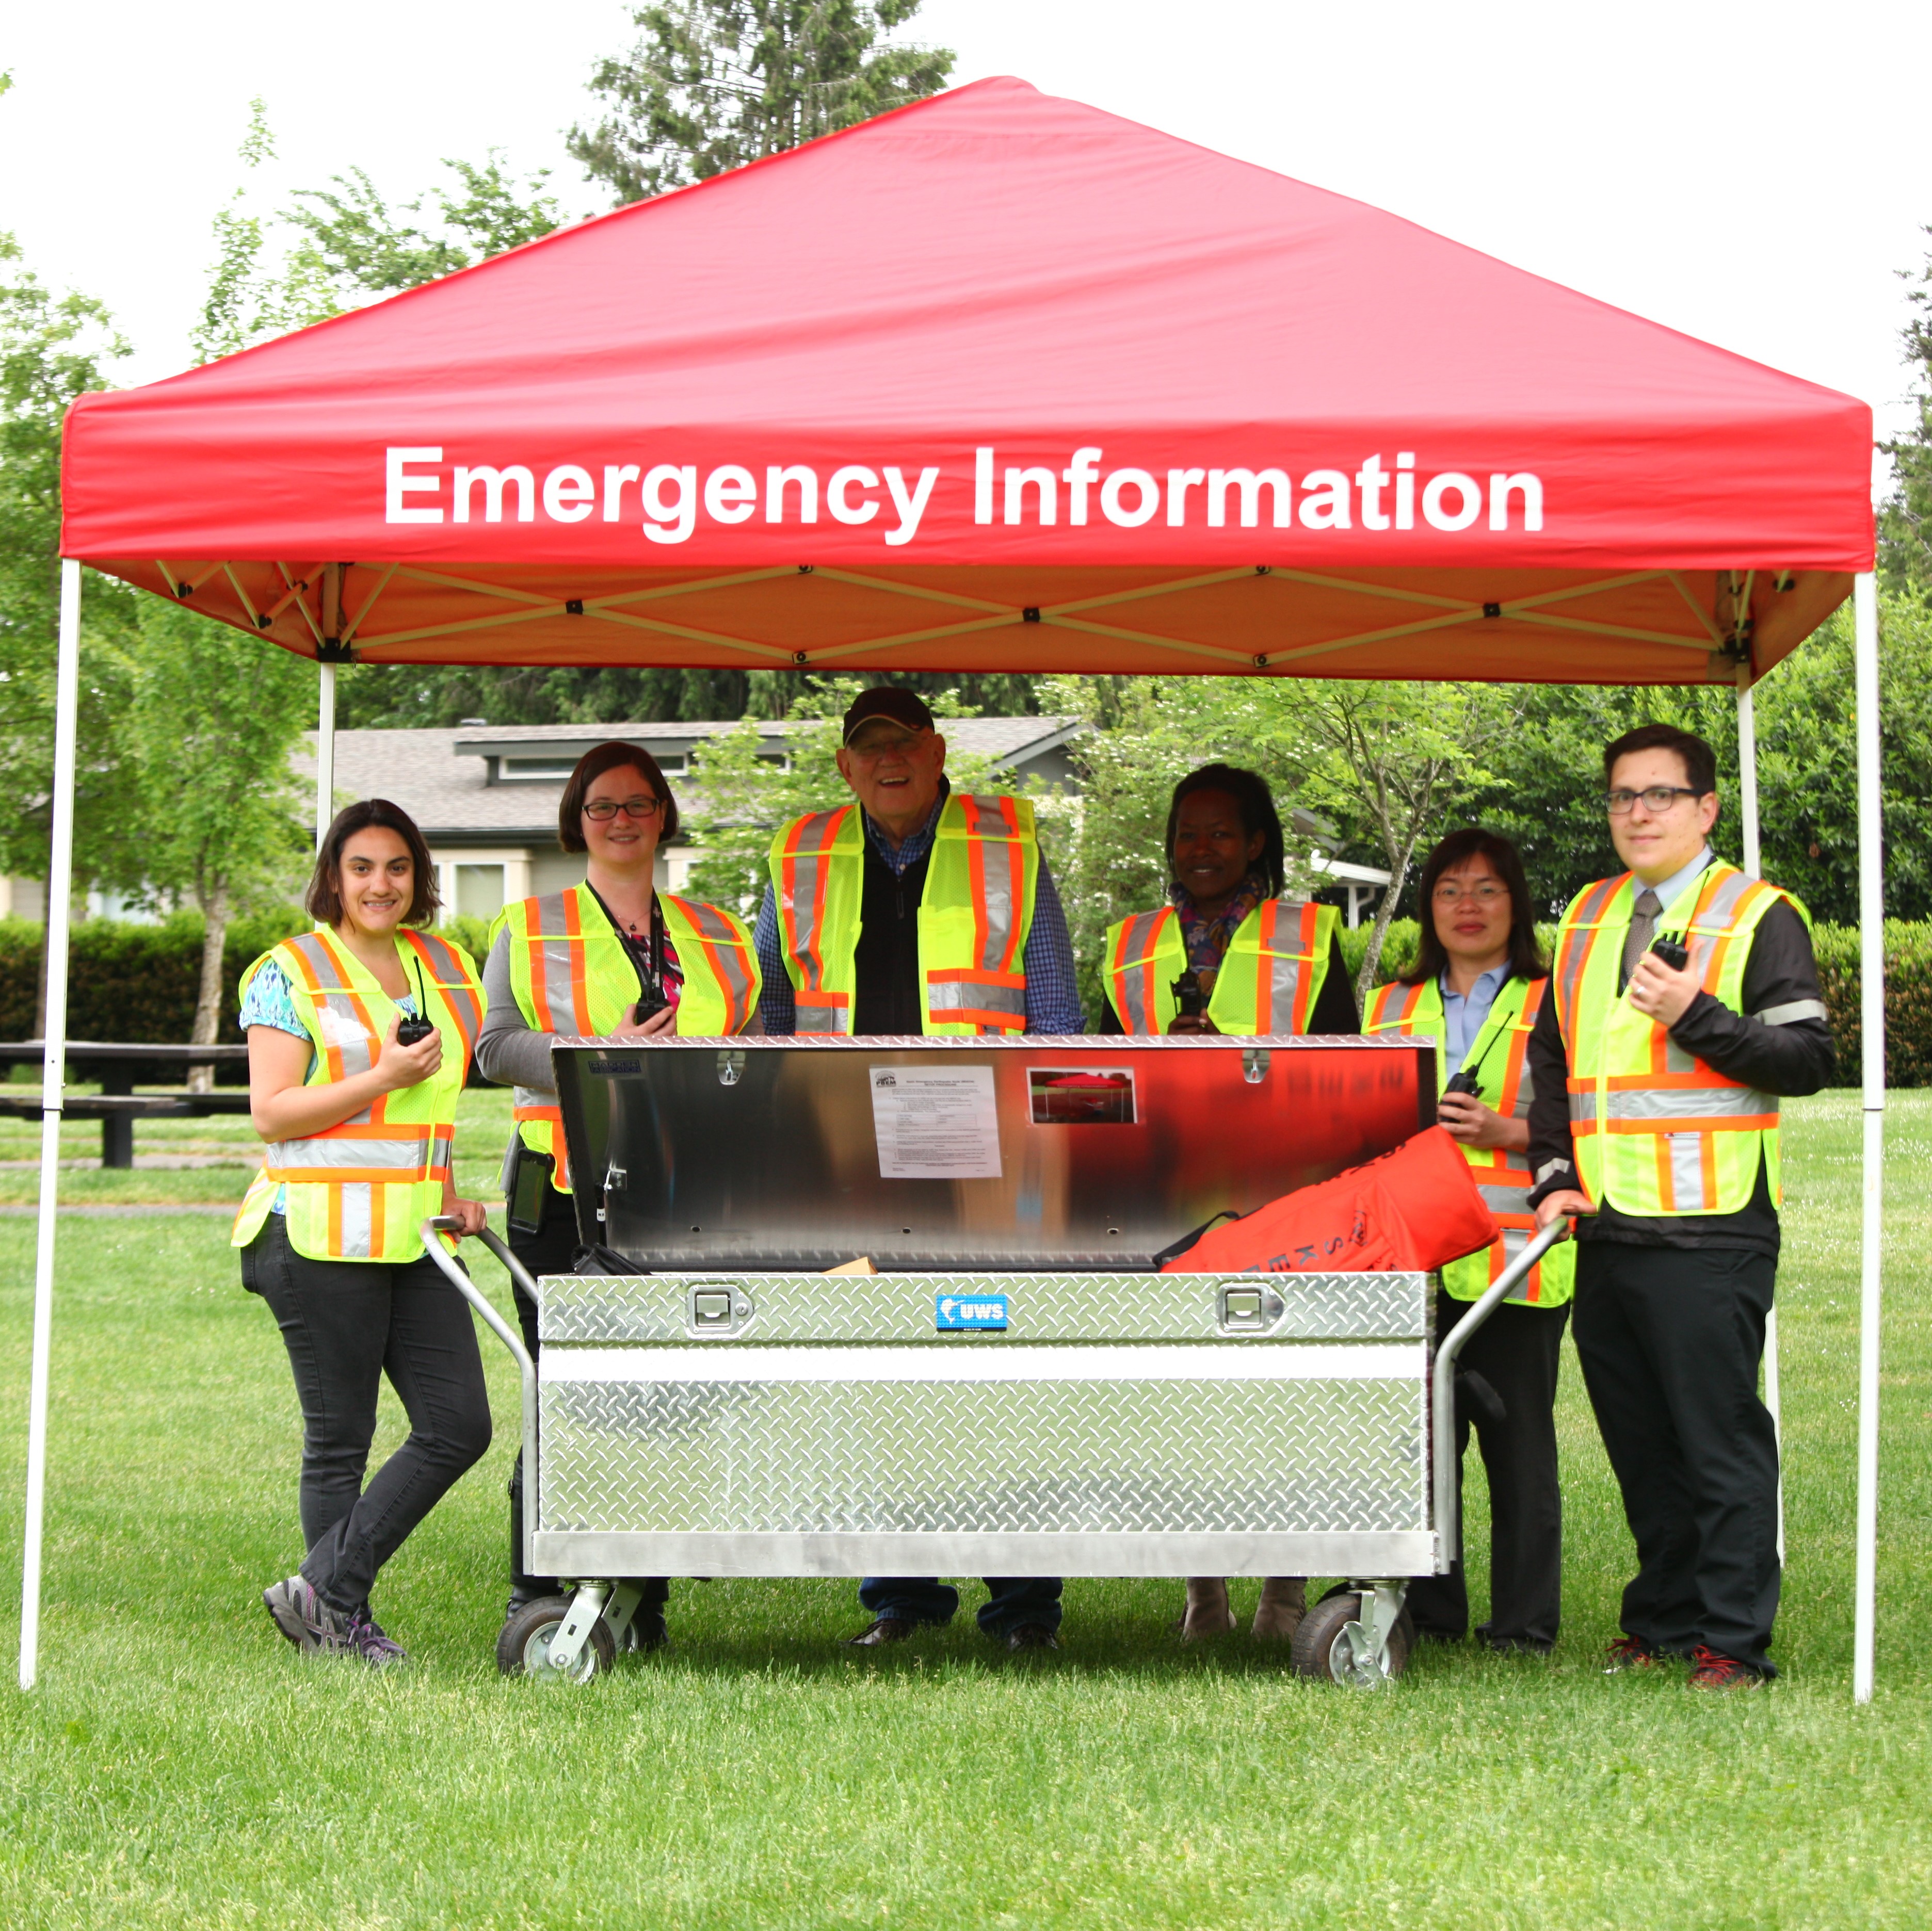 Volunteers in yellow and orange safety vests stand under a red tent labeled "Emergency Information." They are holding radios and standing behind a shiny silver box with the lid partially ajar. 